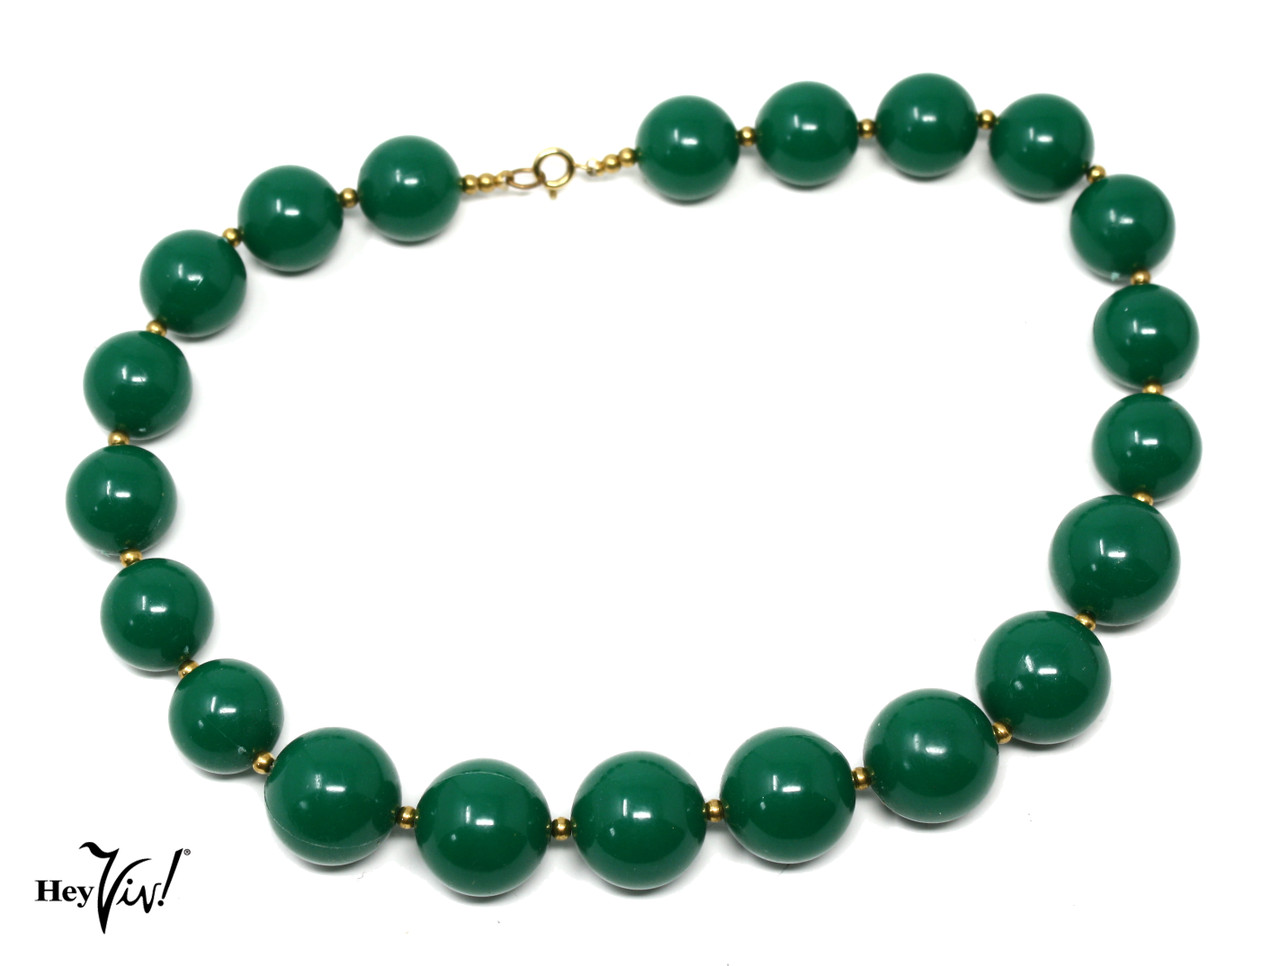 Details about   Exclusive 3 Strand 671.50 Cts Earth Mined Green Emerald Oval Beads Necklace 